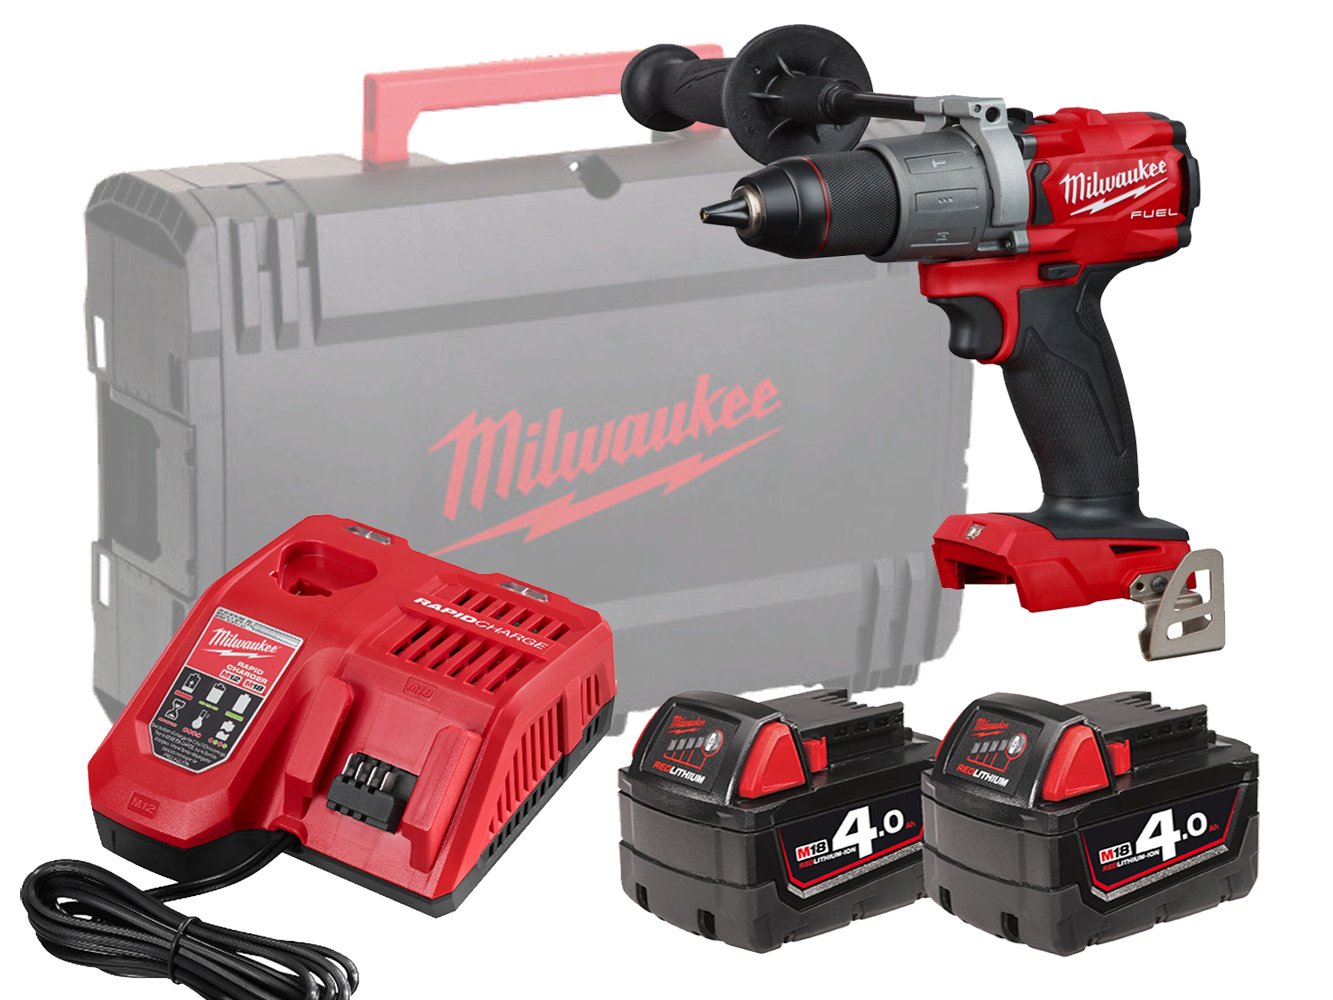 Milwaukee M18FPD2 18V Fuel Brushless Percussion Drill - 4.0Ah Pack